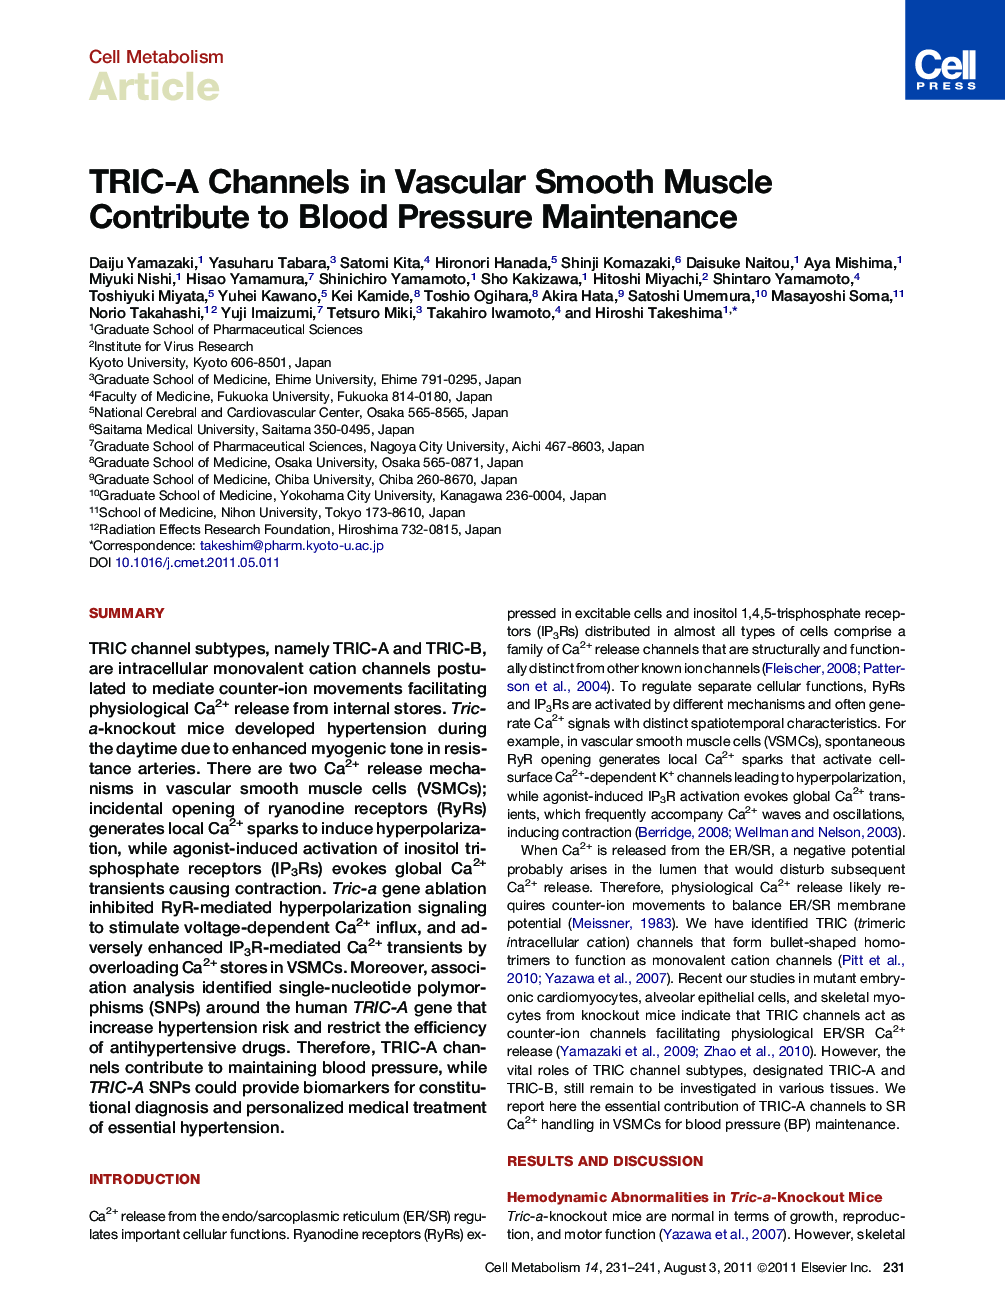 TRIC-A Channels in Vascular Smooth Muscle Contribute to Blood Pressure Maintenance